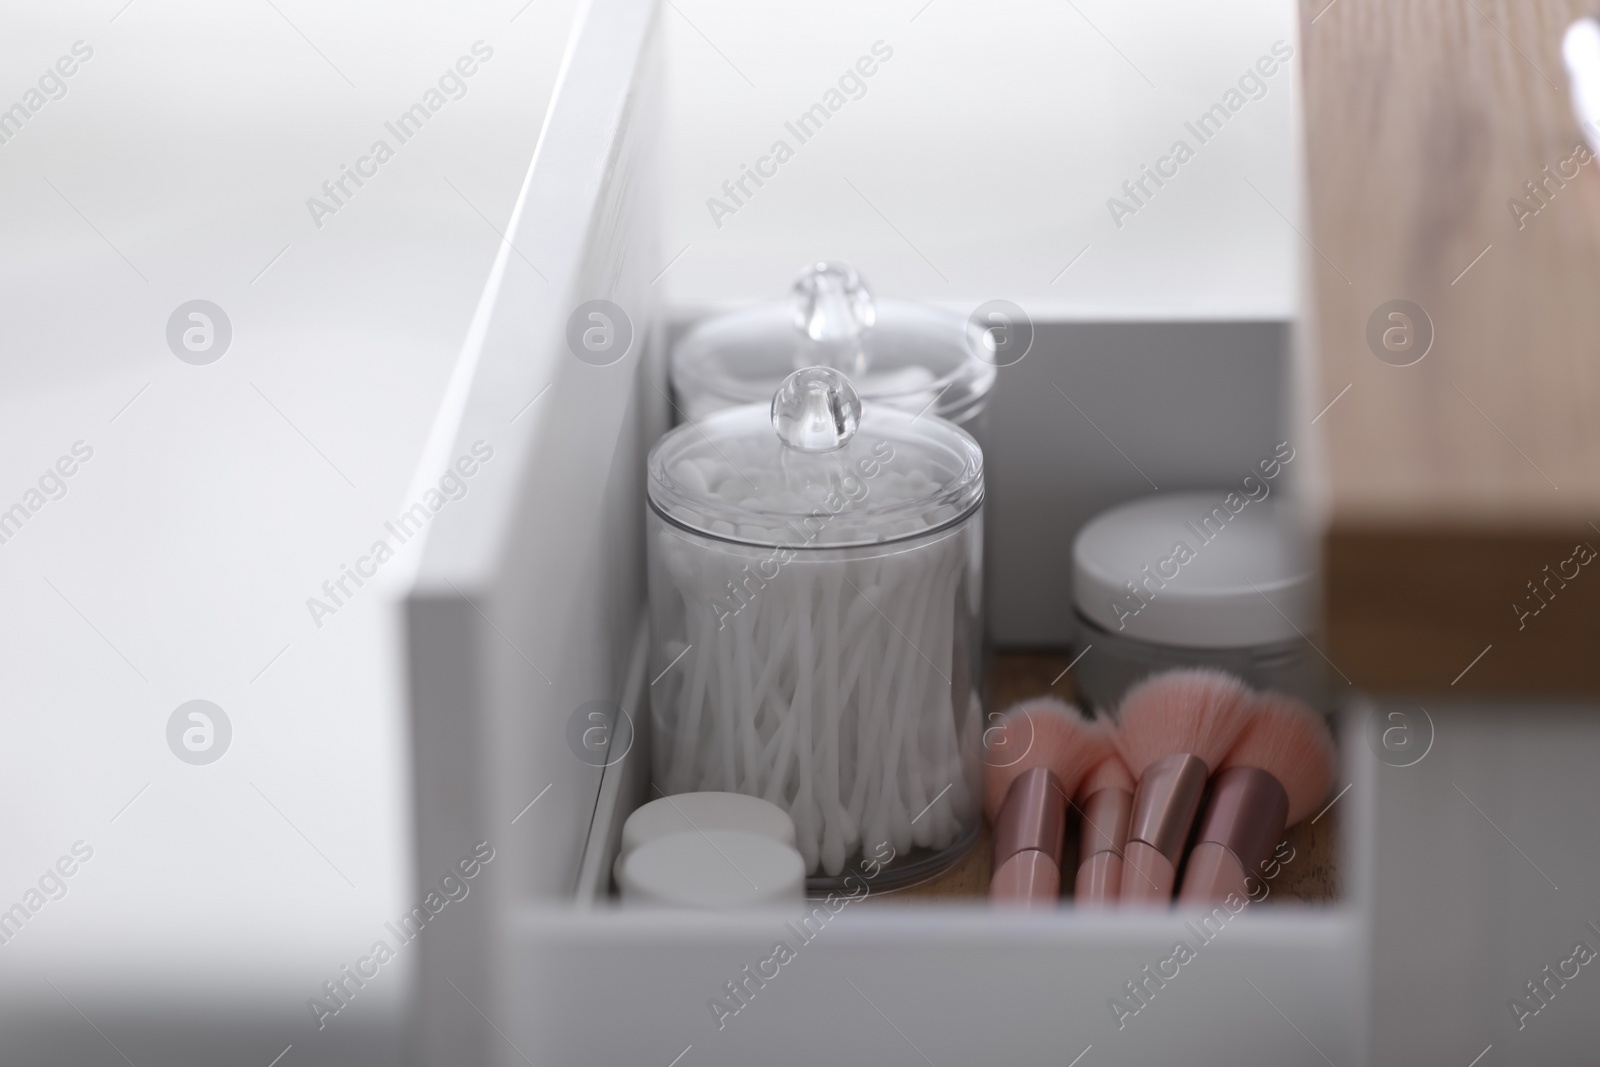 Photo of Cotton buds, pads, creams and makeup brushes in open drawer